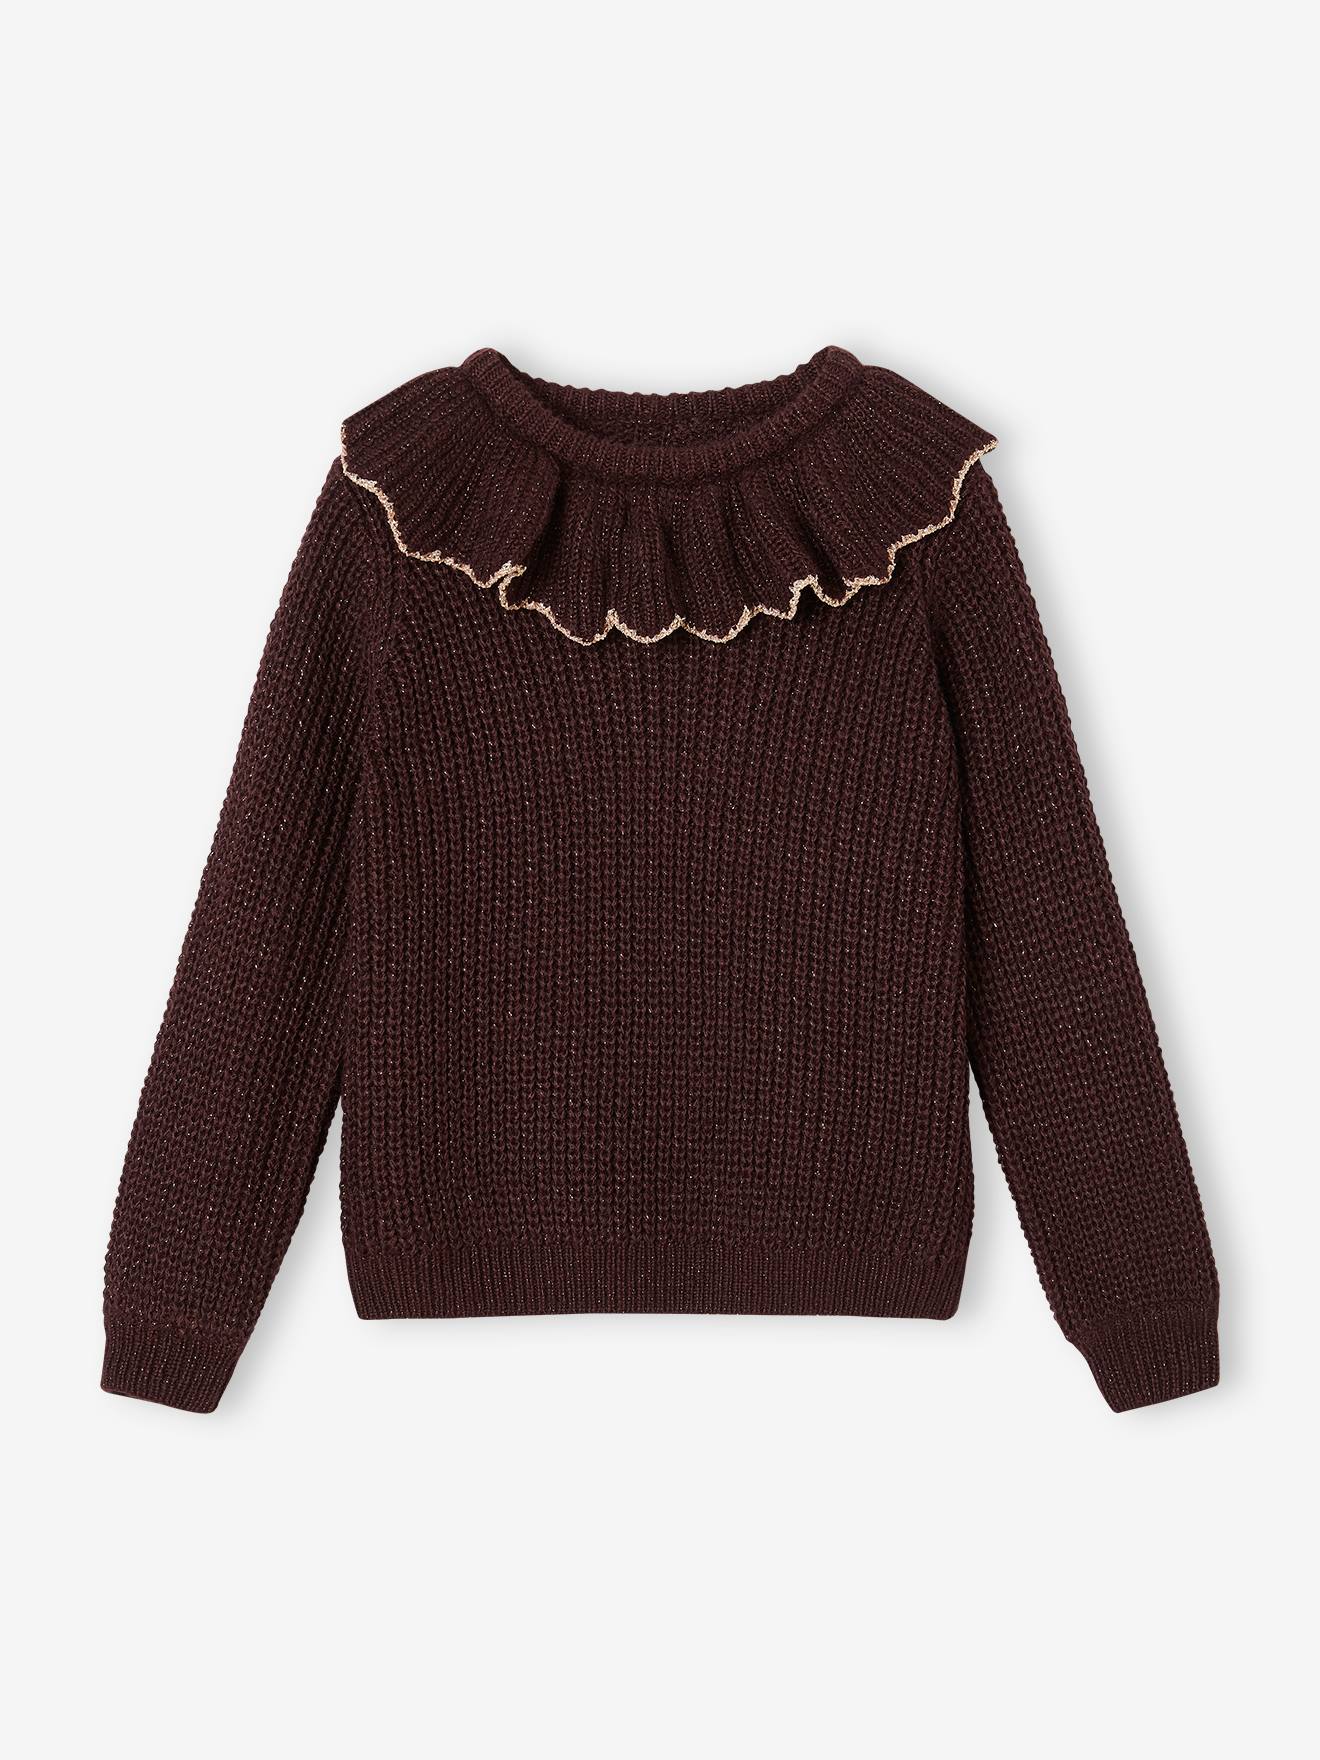 Jumper with Ruffled Collar, Fancy Iridescent Knit for Girls plum